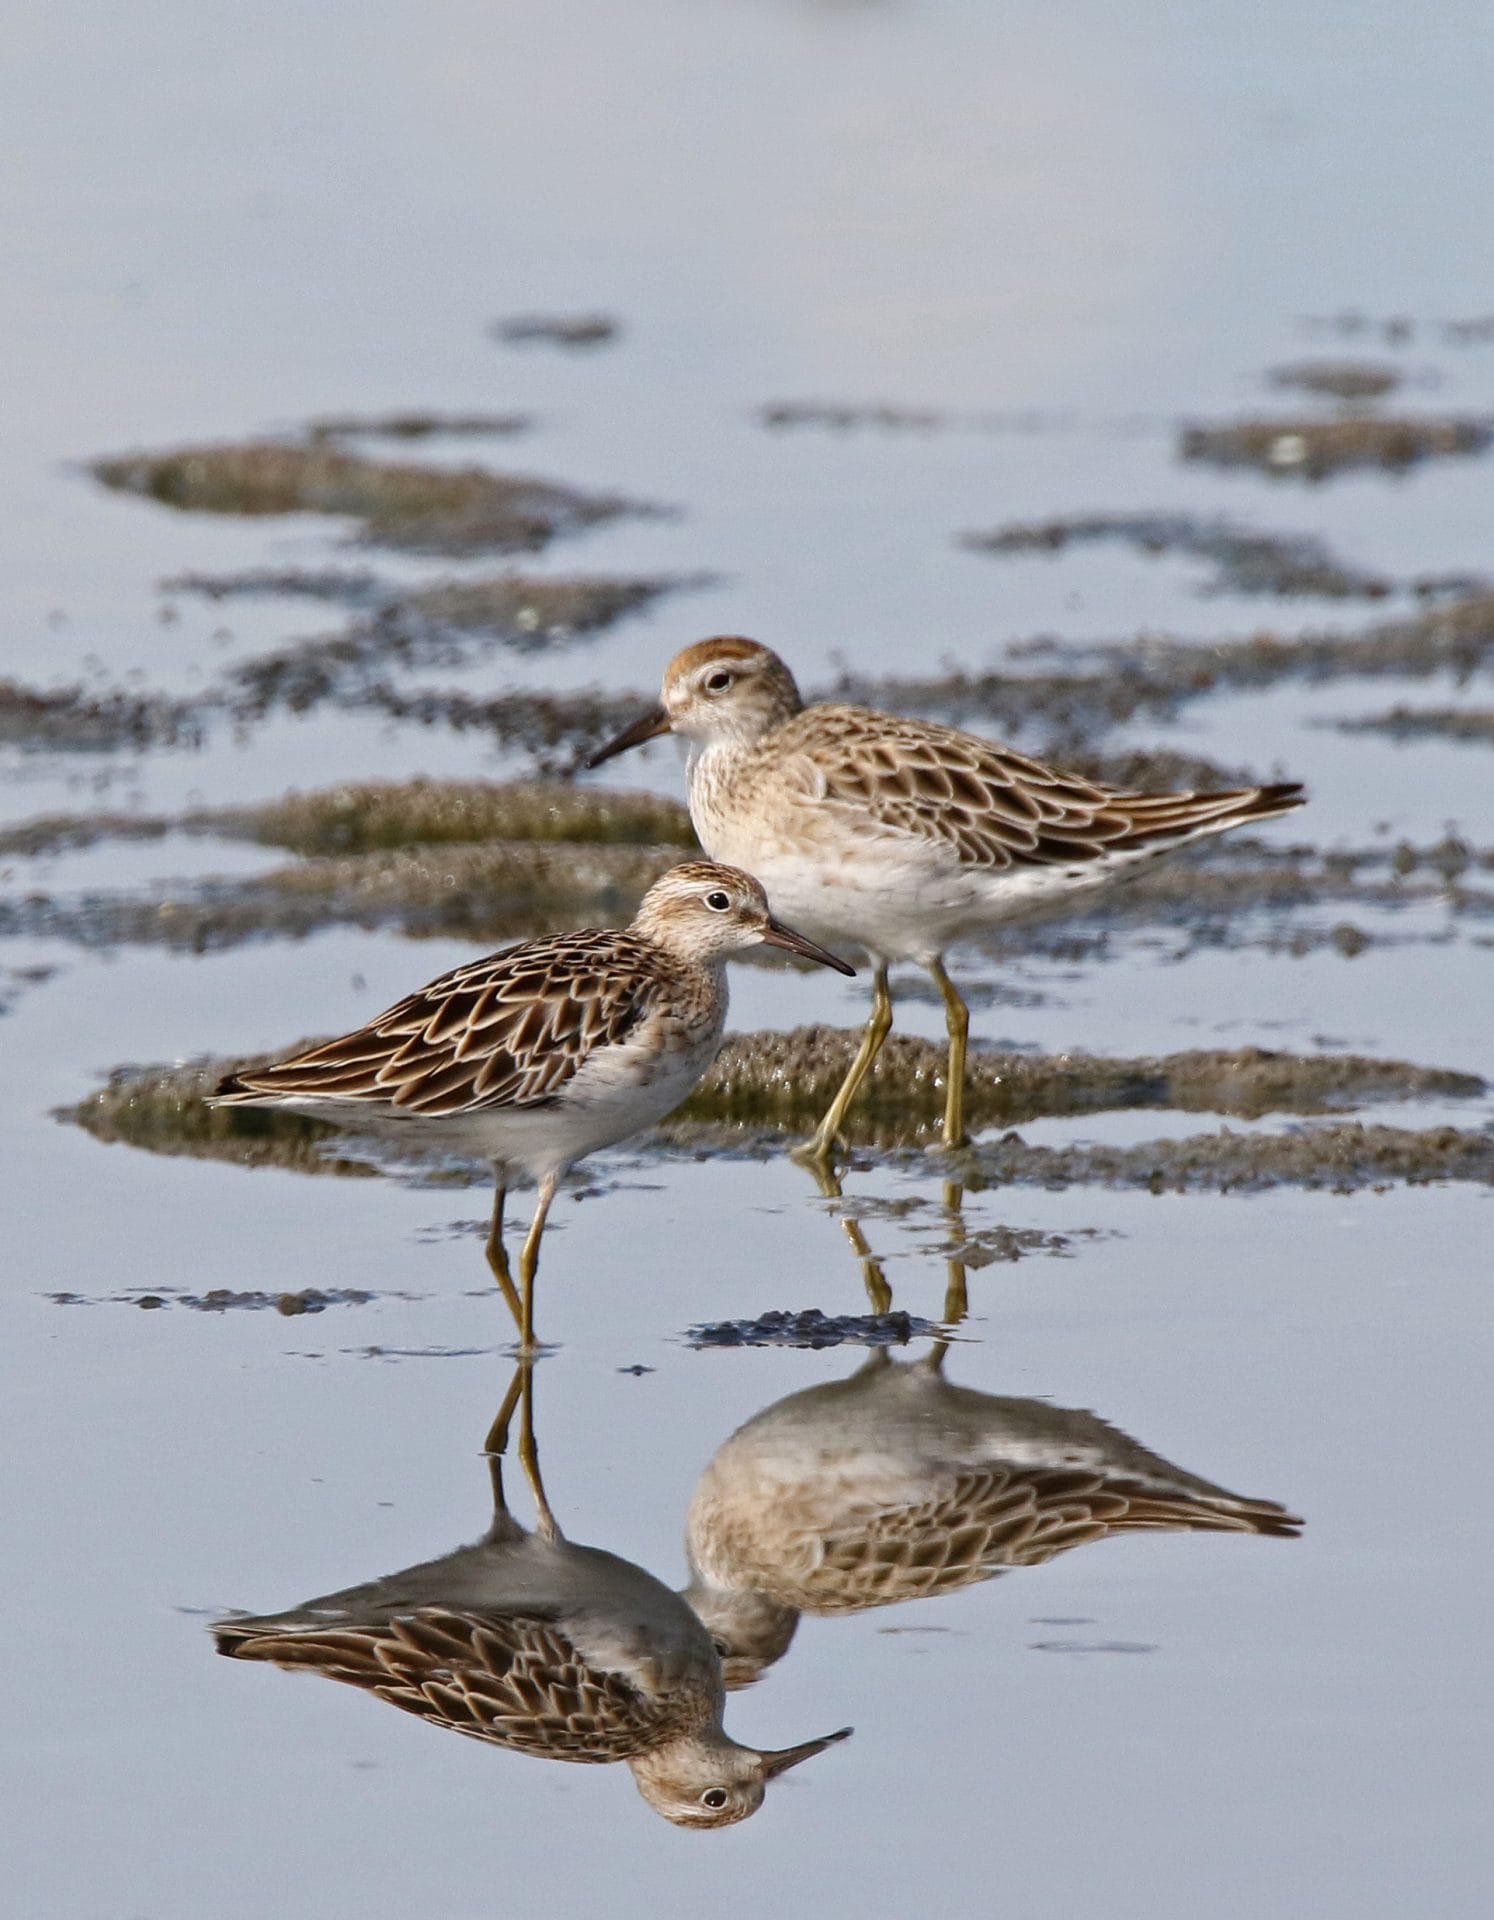 #9 Sharp-tailed Sandpiper. Photo by Pete SImpson.